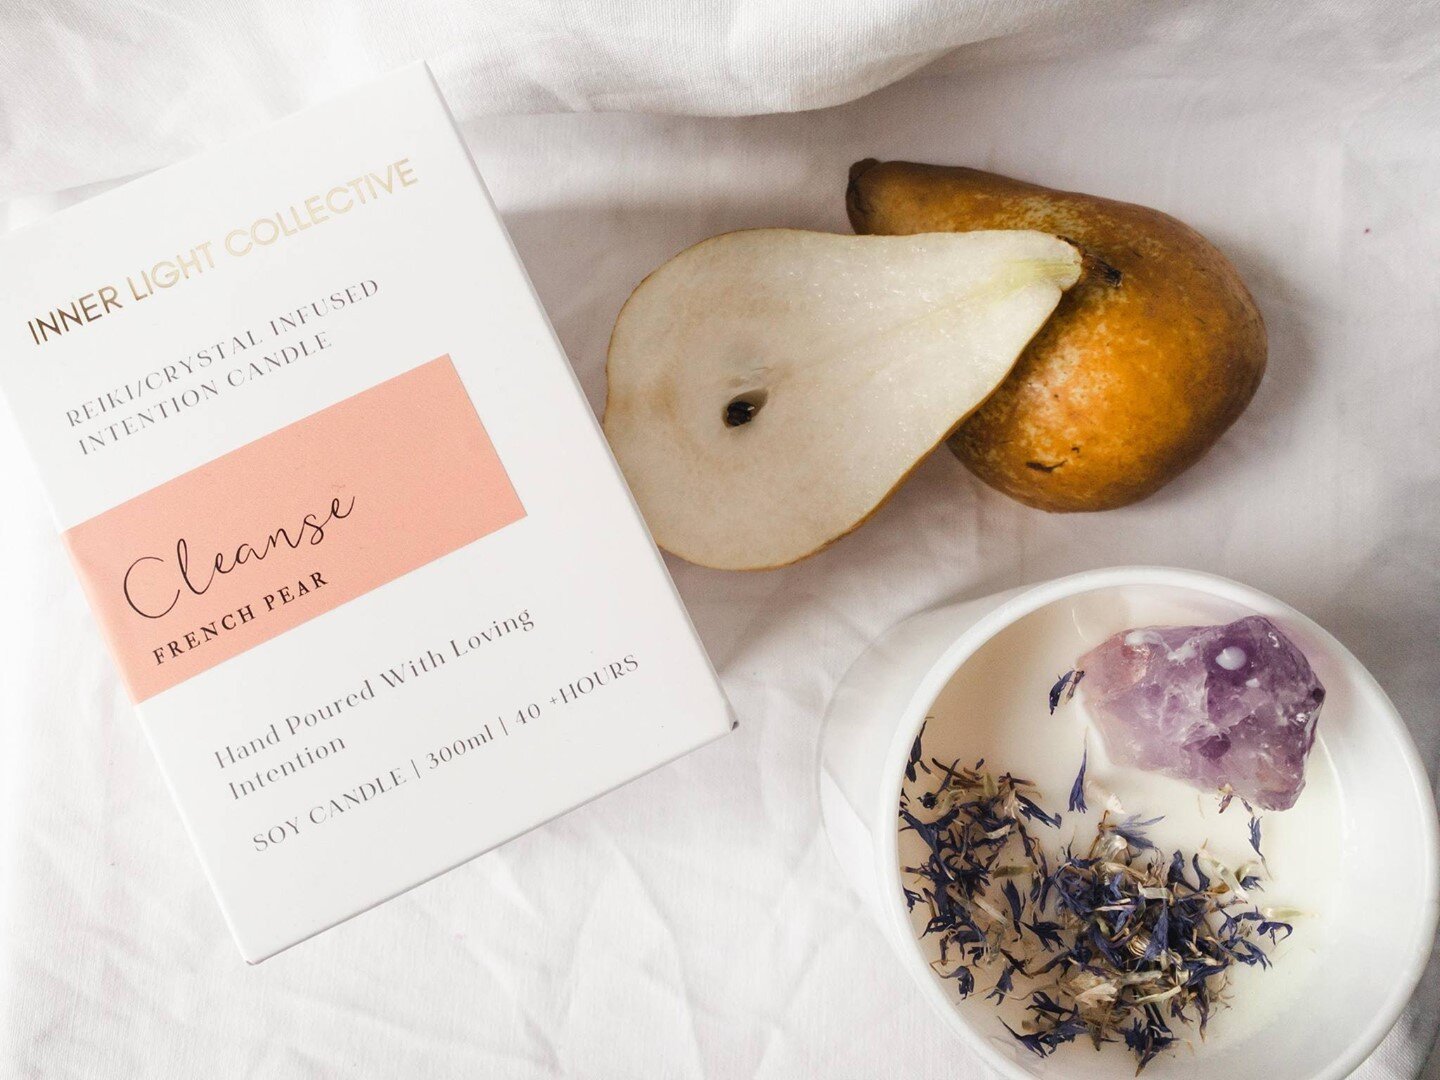 In other exciting news, I will be stocking @inner_lightcollective candles at my new Wellness Space🕯️

Pop in when we're open and restrictions have lifted. Enjoy a cup of tea and browse Elle Brown Women's Wellness products!

Coming soon!

#ellebrownw